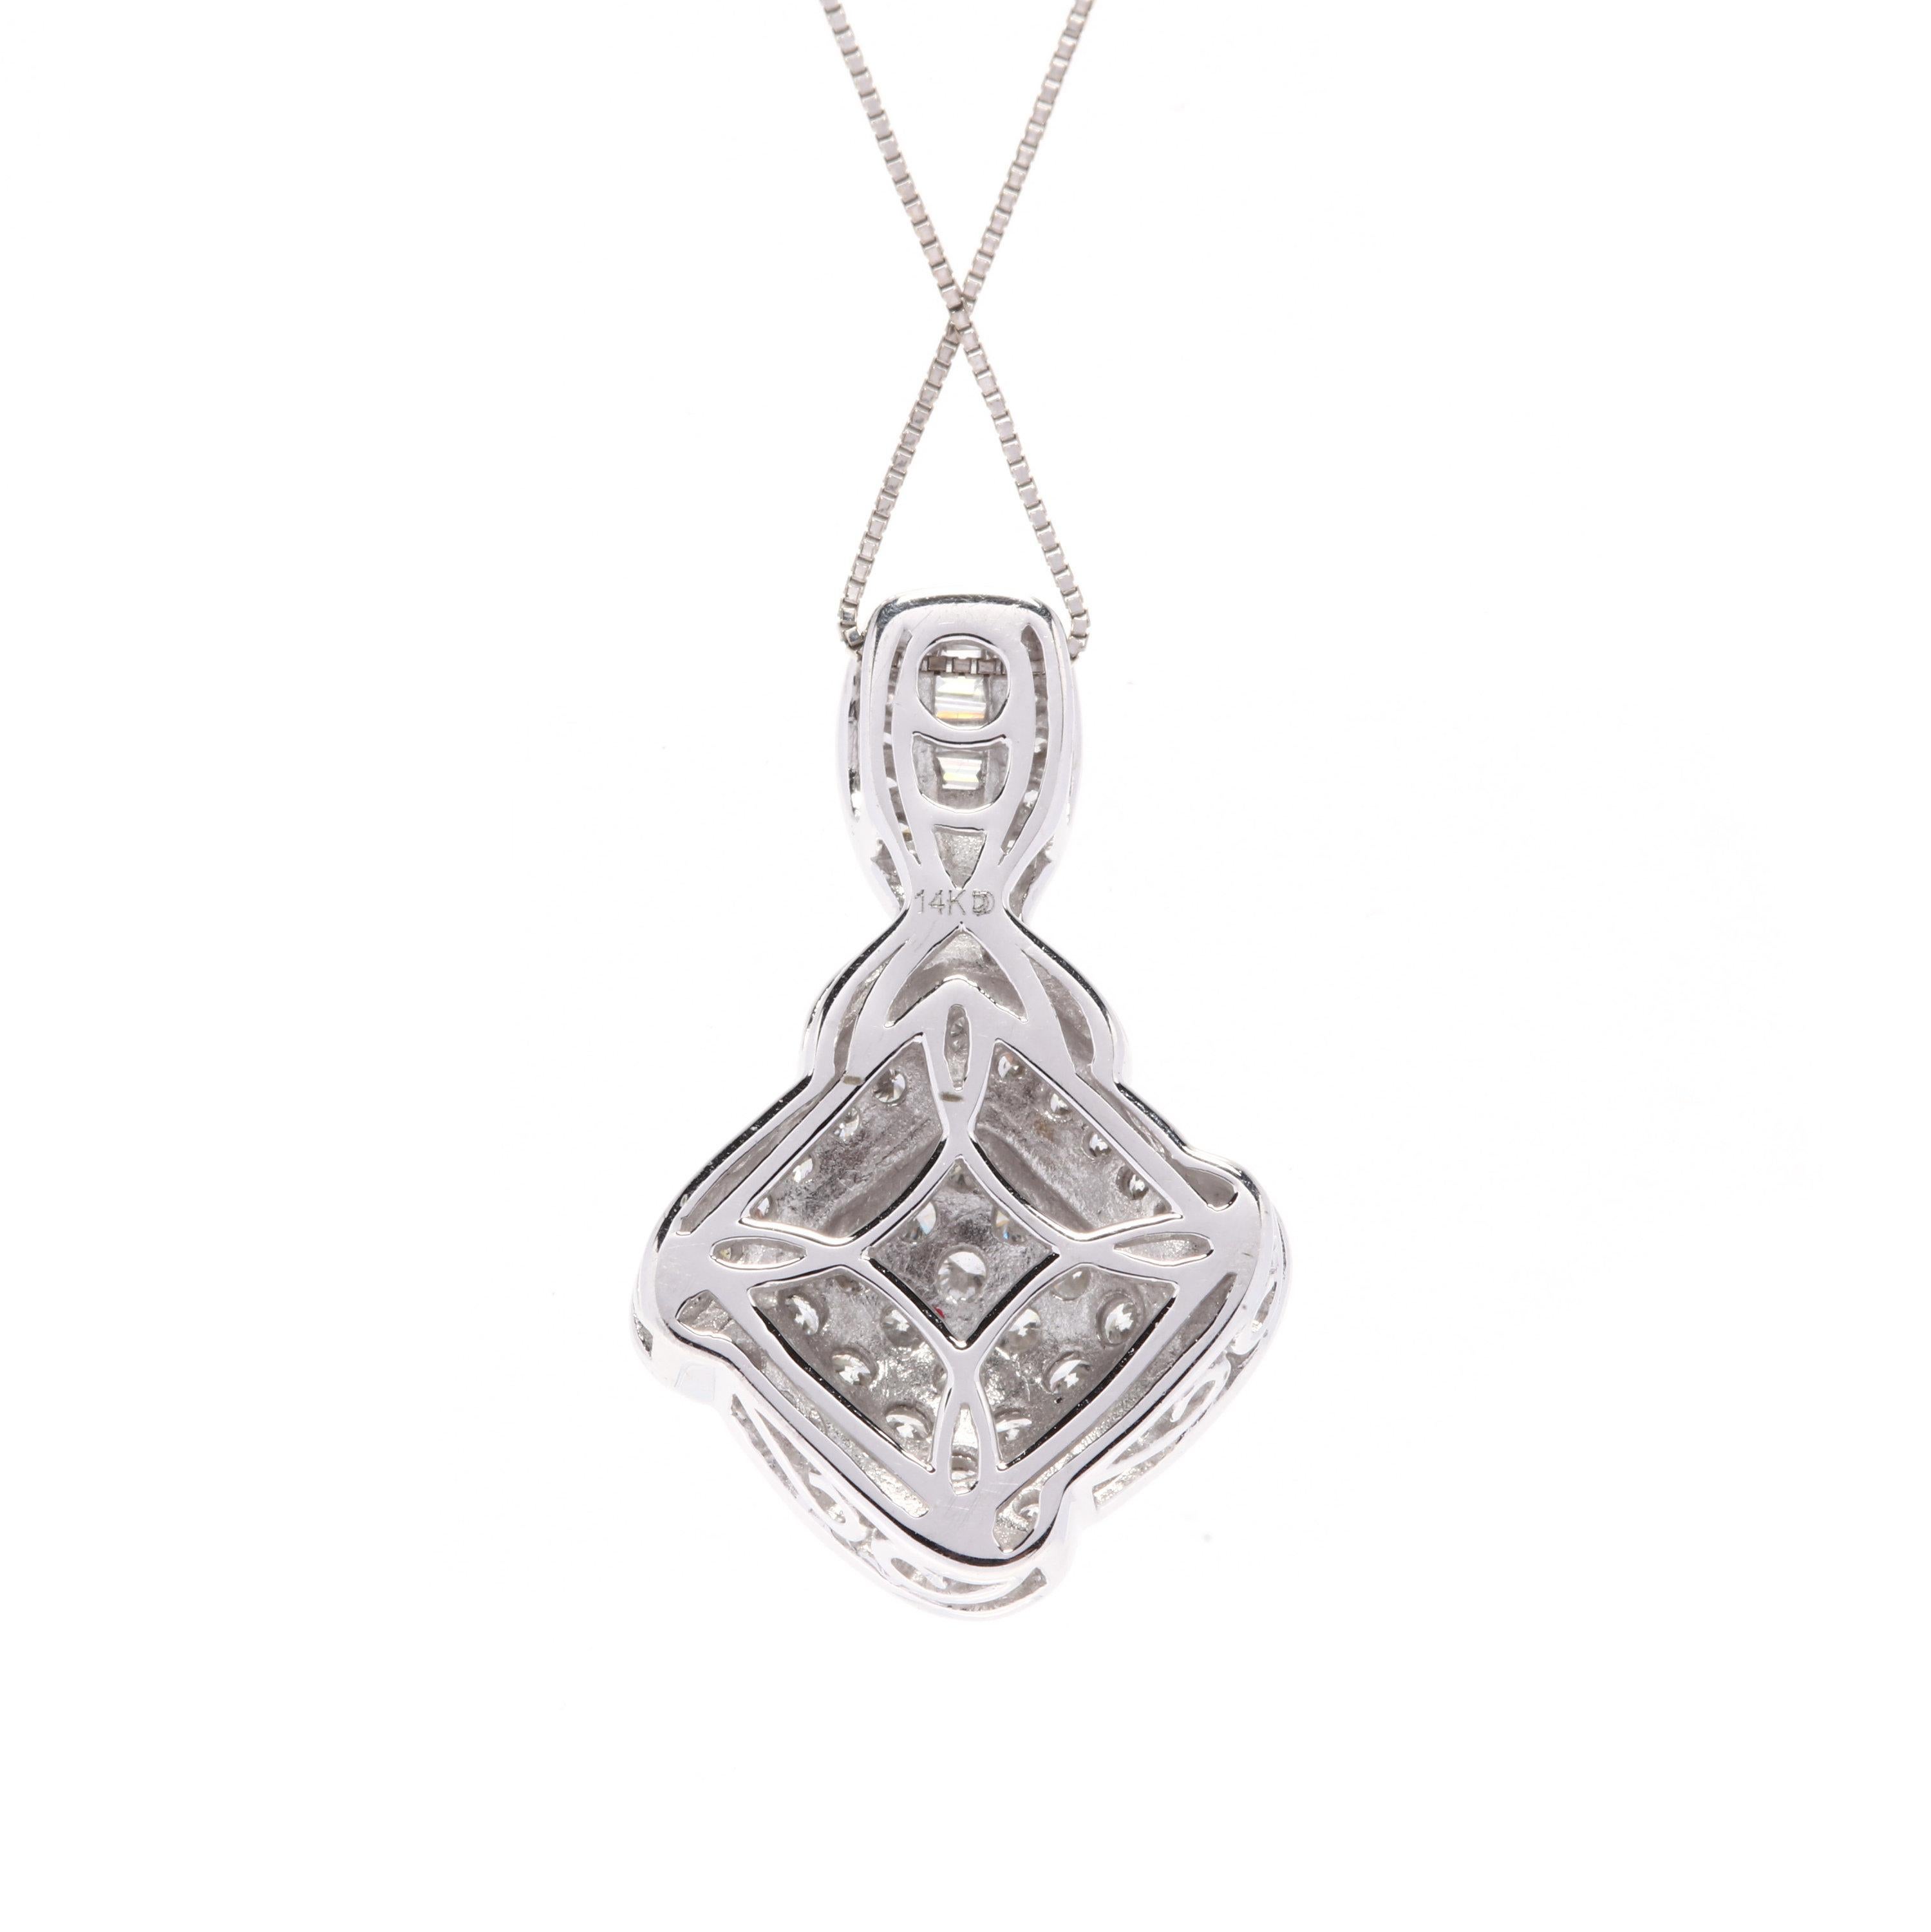 14k white gold and diamond cluster pendant necklace. A diamond pendant with a detailed border and bale. It's on a dainty box chain and would layer well with other necklaces. Timeless and classy, a necklace like this with over a carat of diamonds